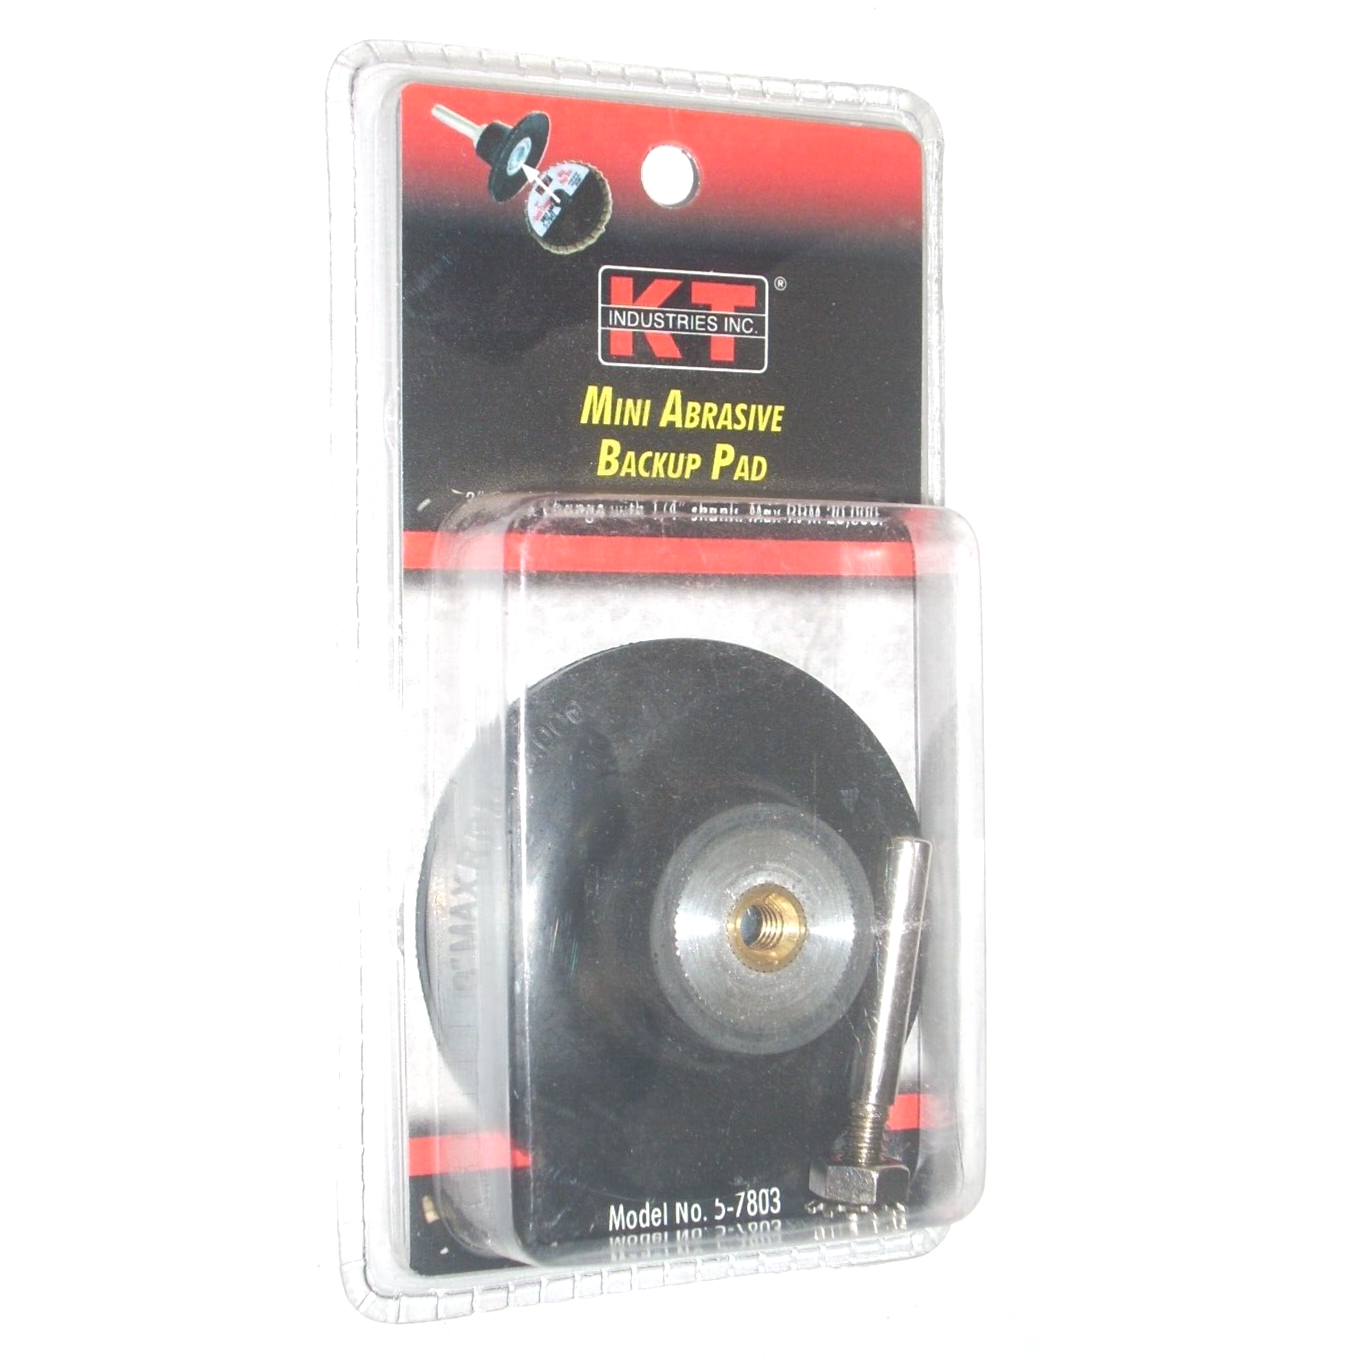 KT Industries 5-7803 Mini Abrasive Backup Pad 3 x 1/4" Shank for Type R Discs